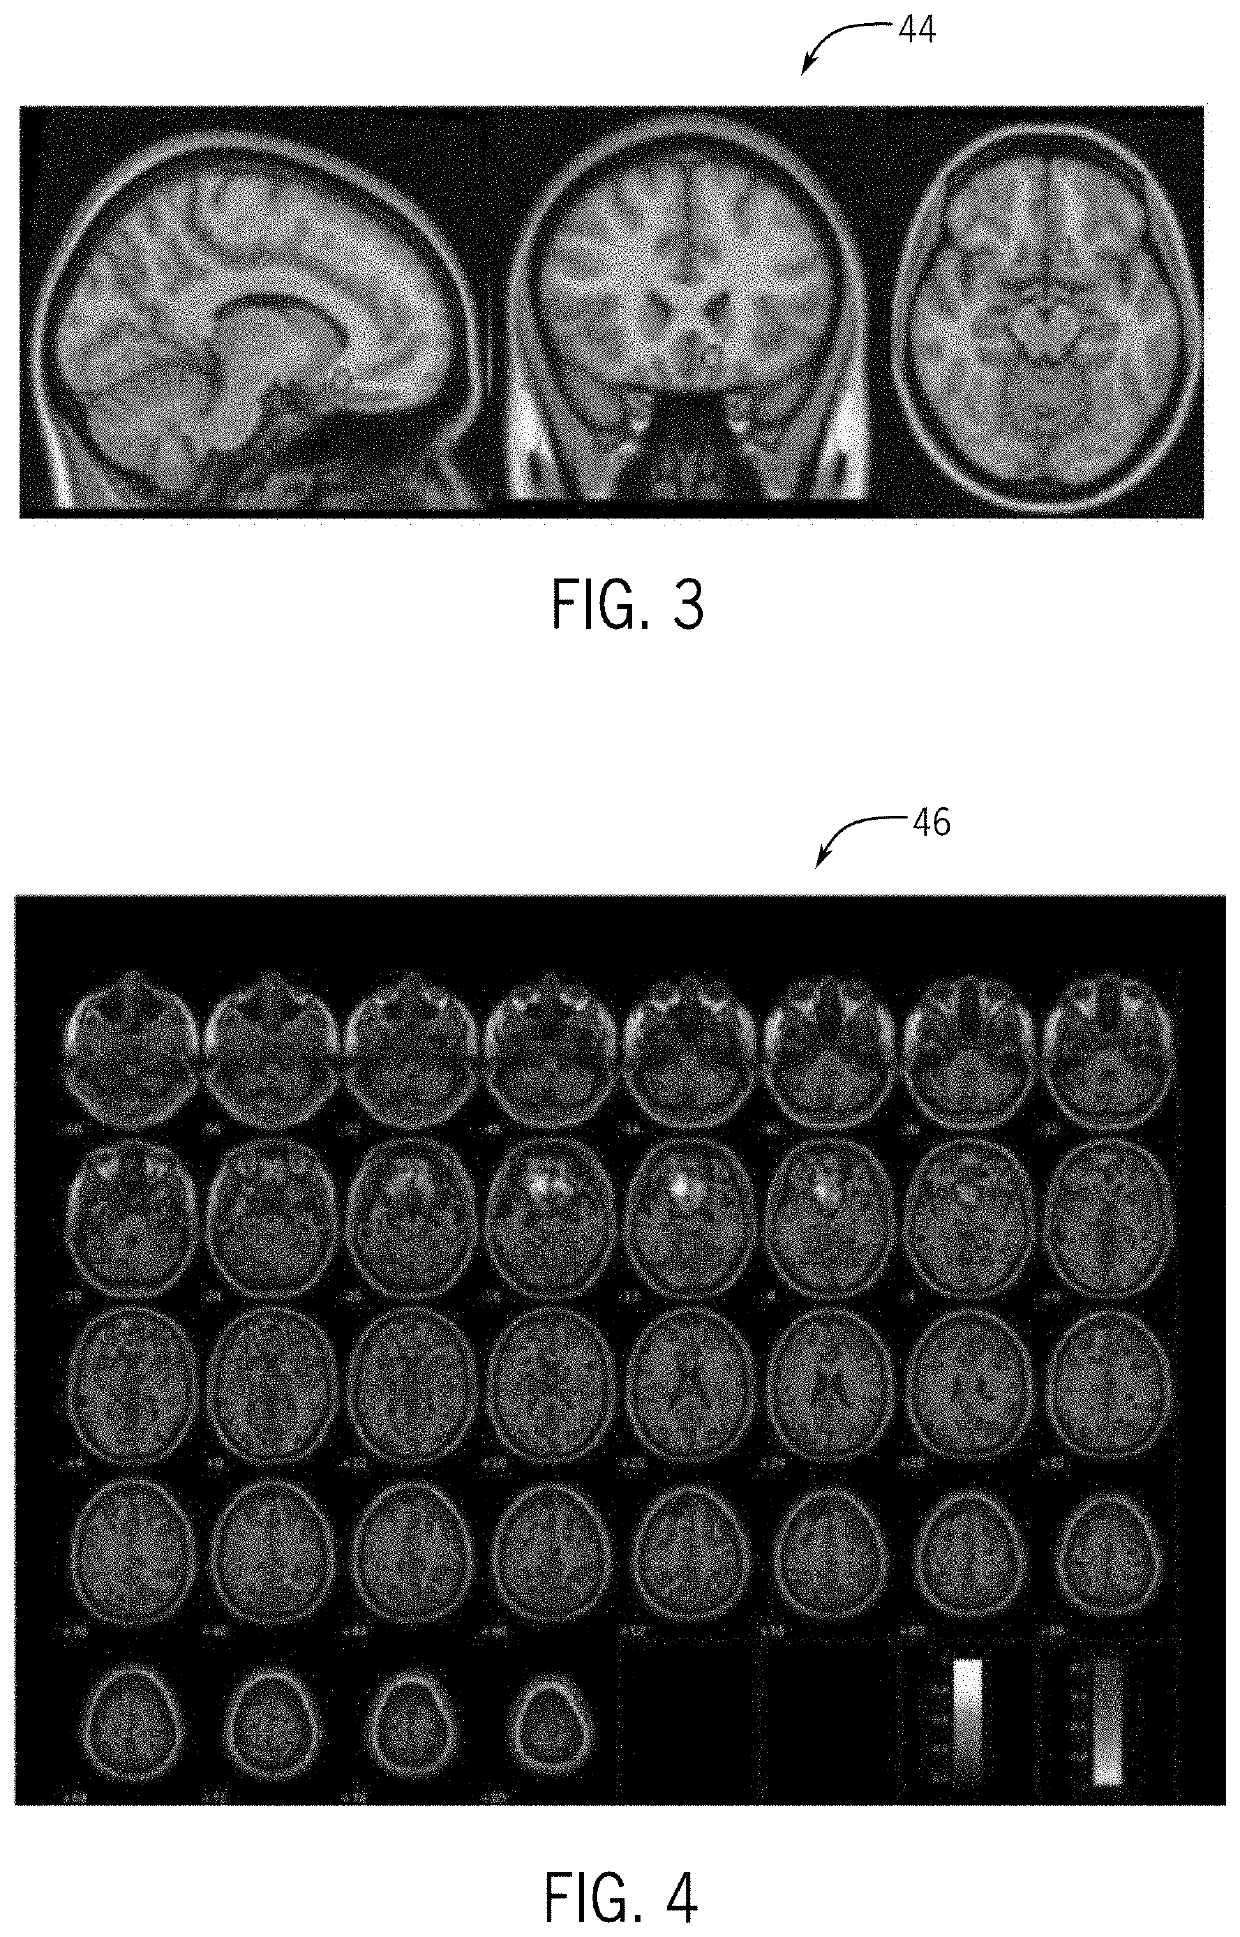 Brain connectivity atlas for personalized functional neurosurgery targeting and brain stimulation programming